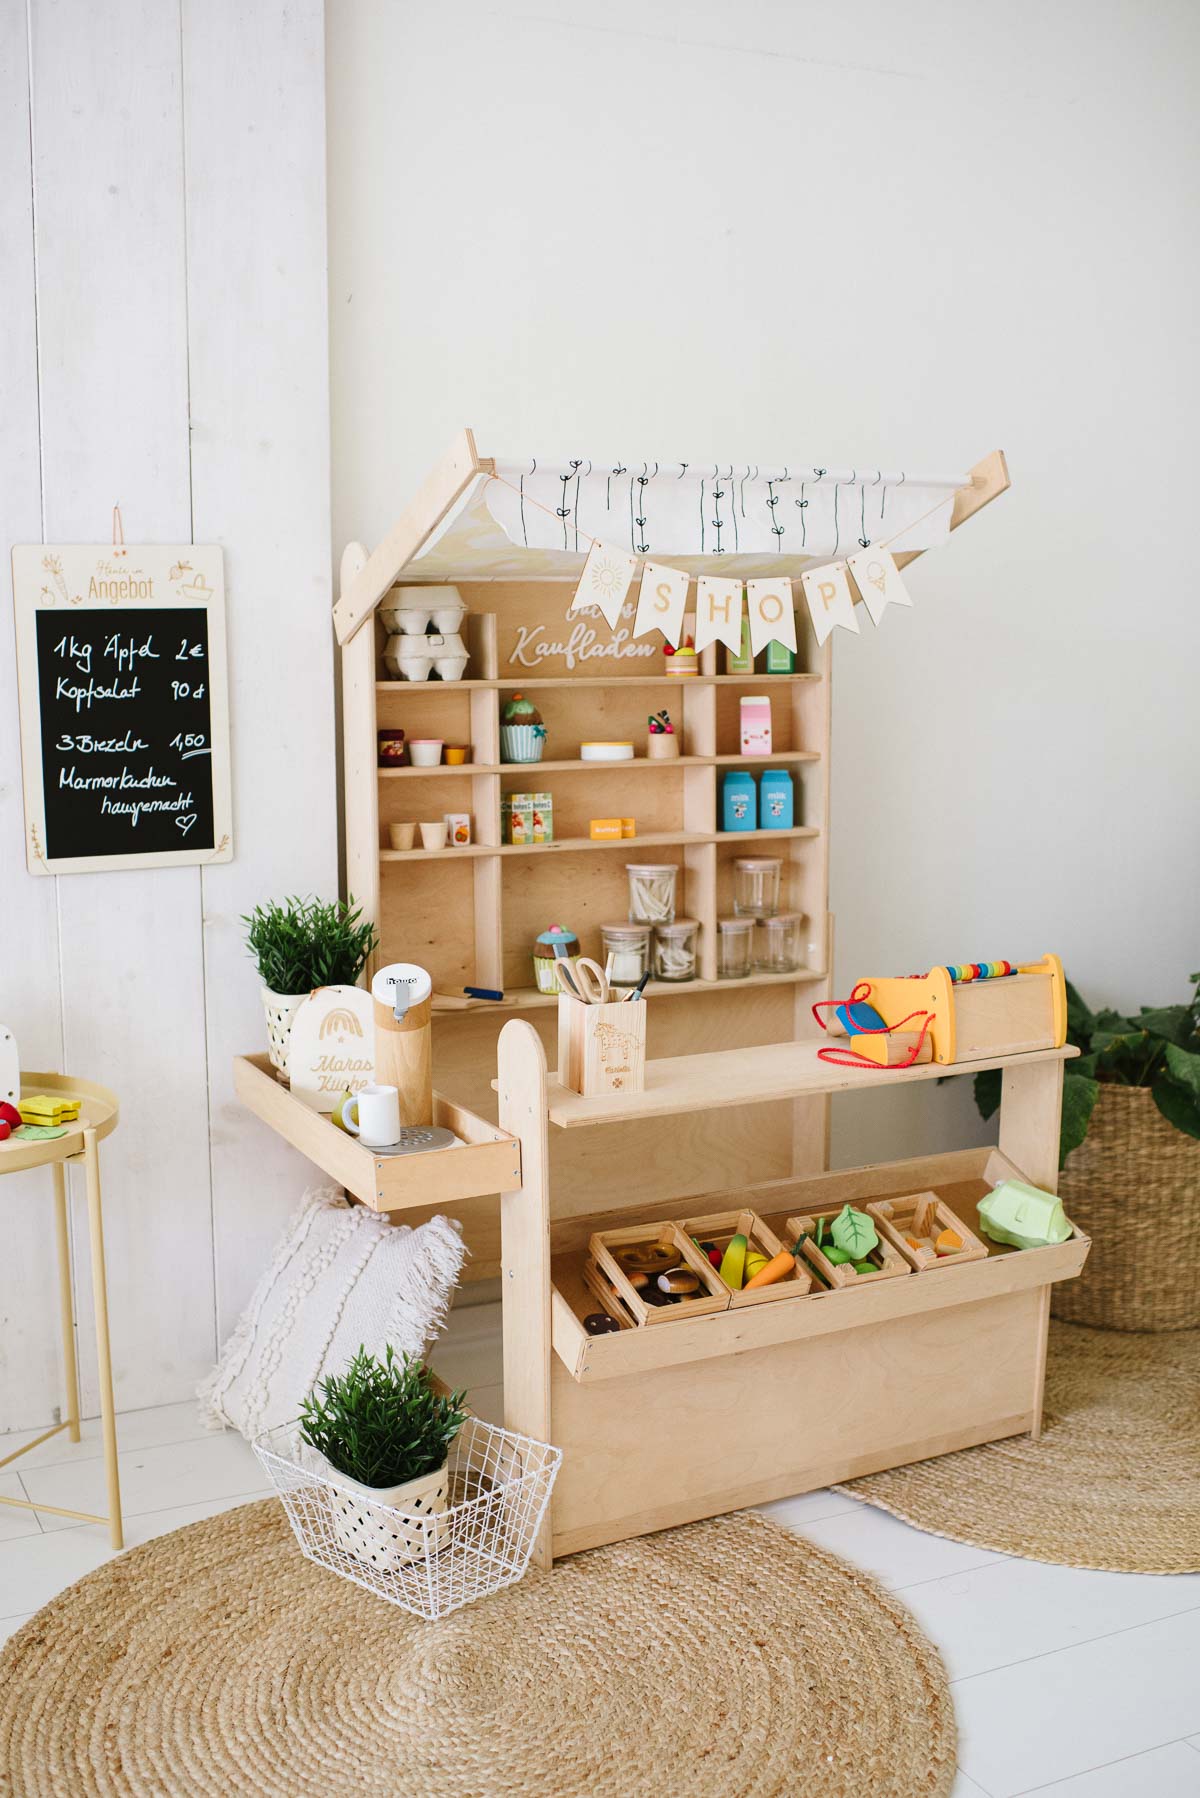 Shop play kitchen Personalized wooden accessories - Shop & play kitchen: Personalized wooden accessories